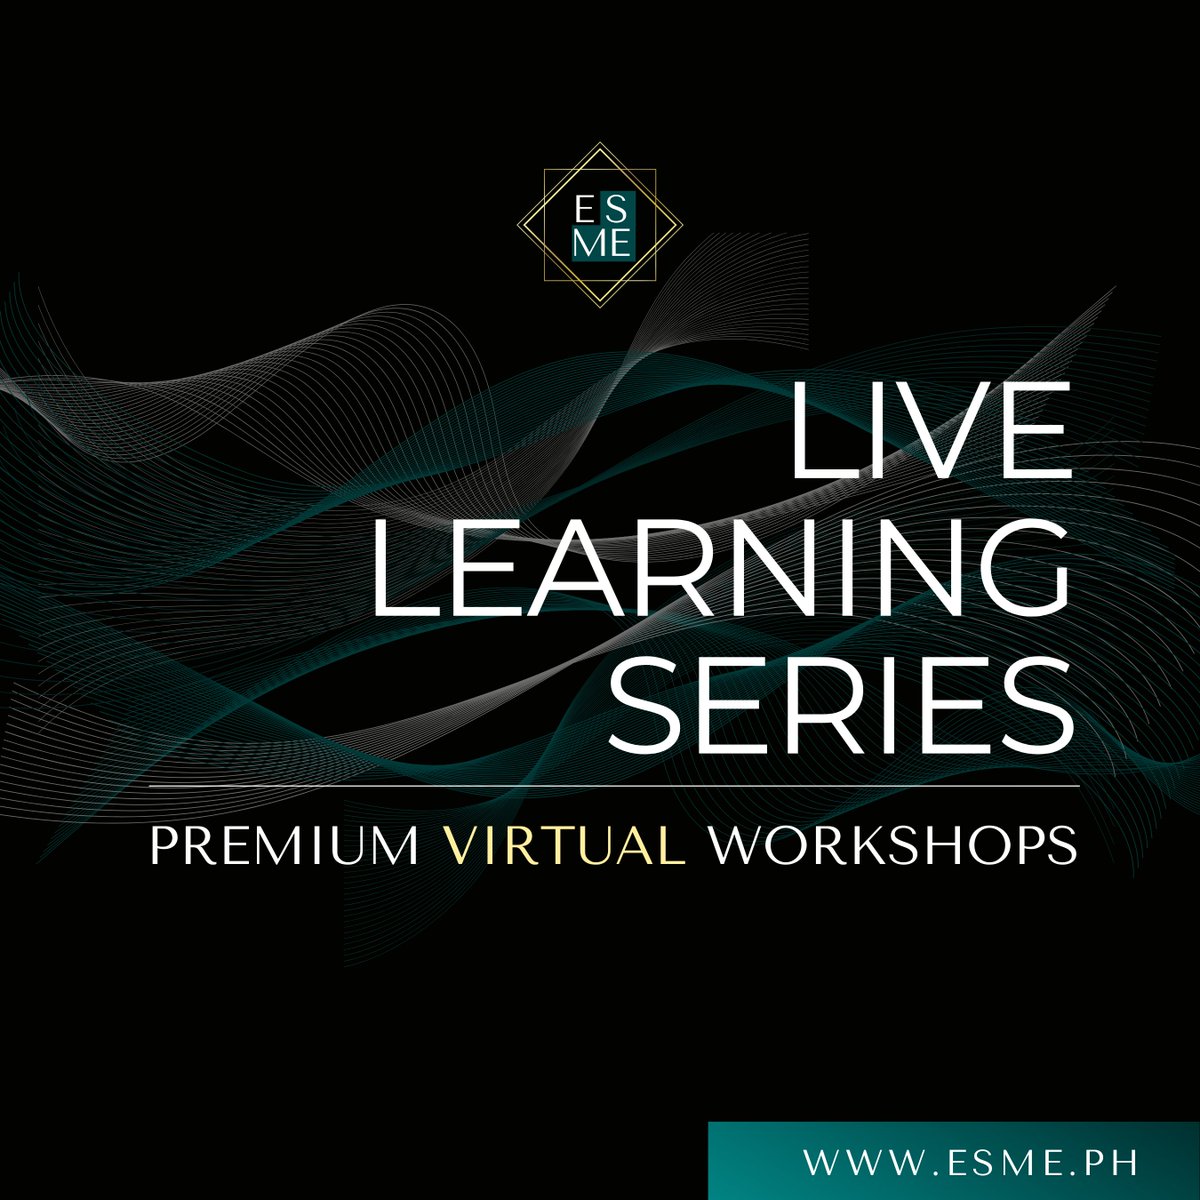 RT @EsmePhilippines: Prepare, explore, and mimic the future through the wonder of games! 🎮

Learn more at esme.ph/courses/Action…

#EsmePhilippines
#EsmeLLS2021
#Games
#Gamification